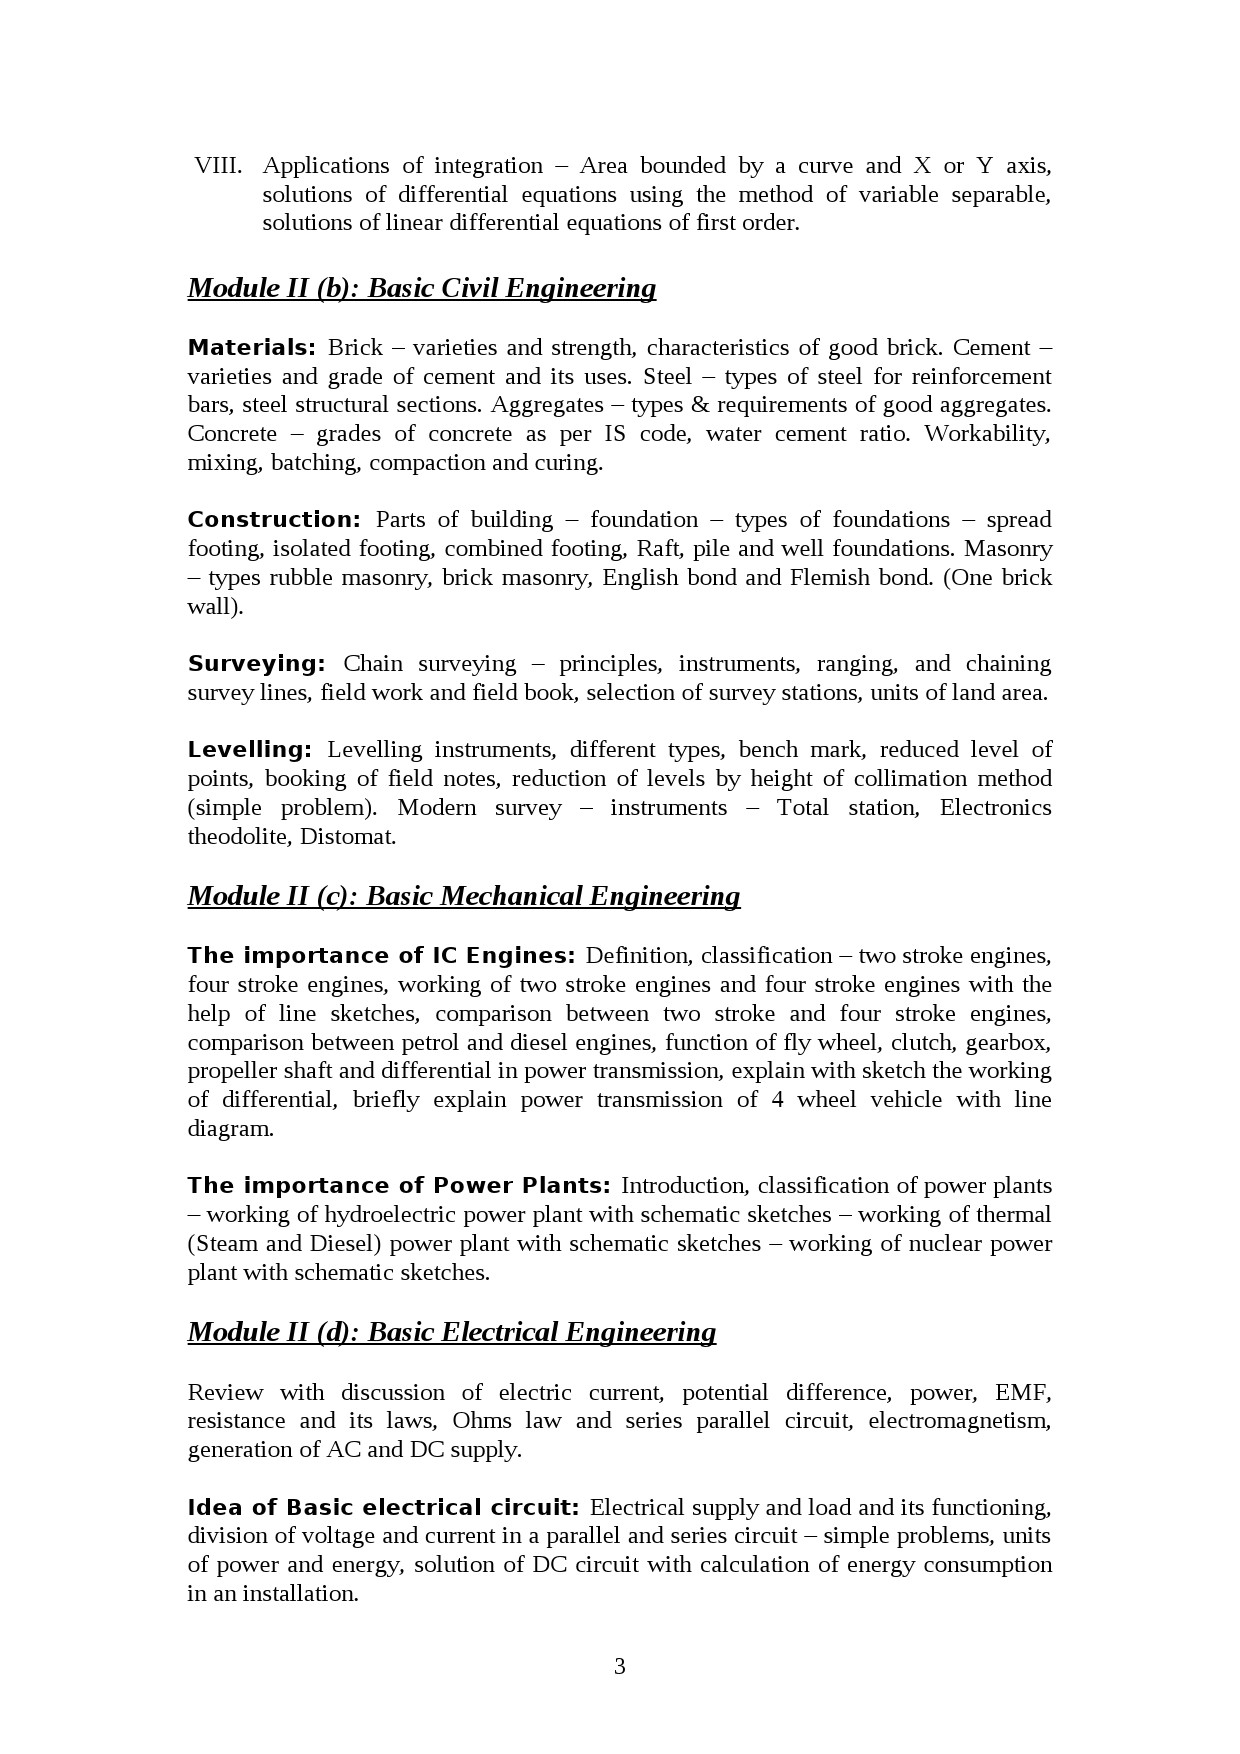 Information Technology Lecturer in Polytechnic Exam Syllabus - Notification Image 3